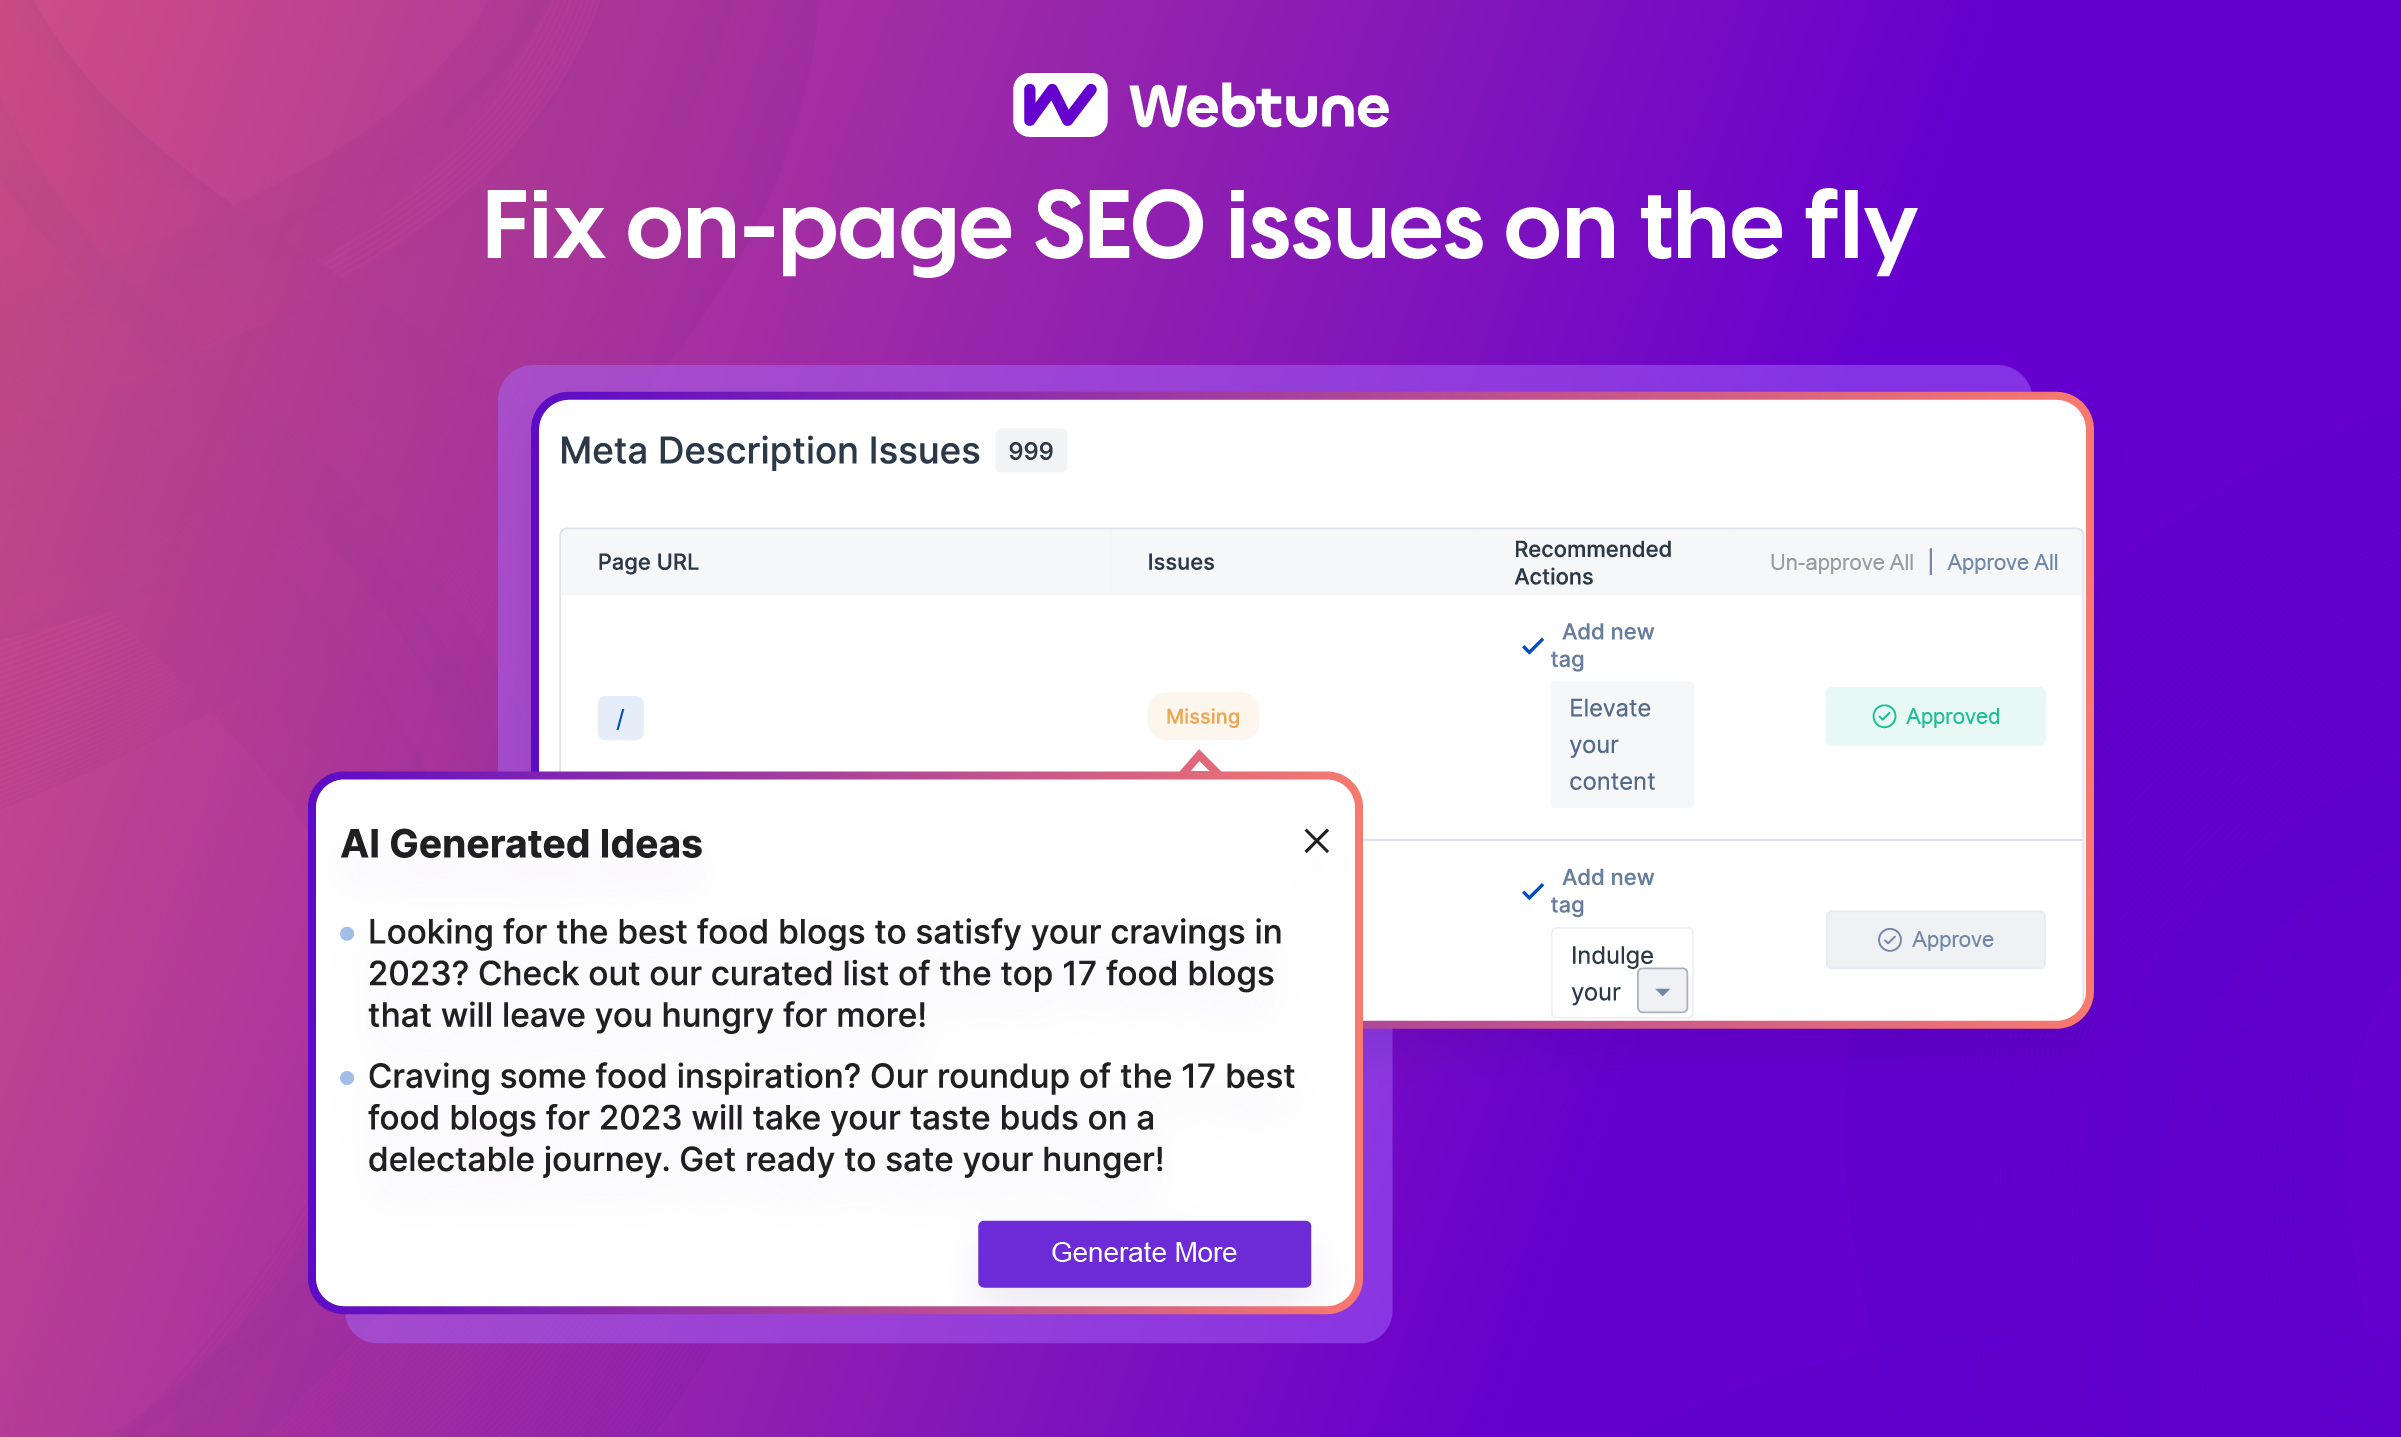 Fix on-page SEO issues on the fly